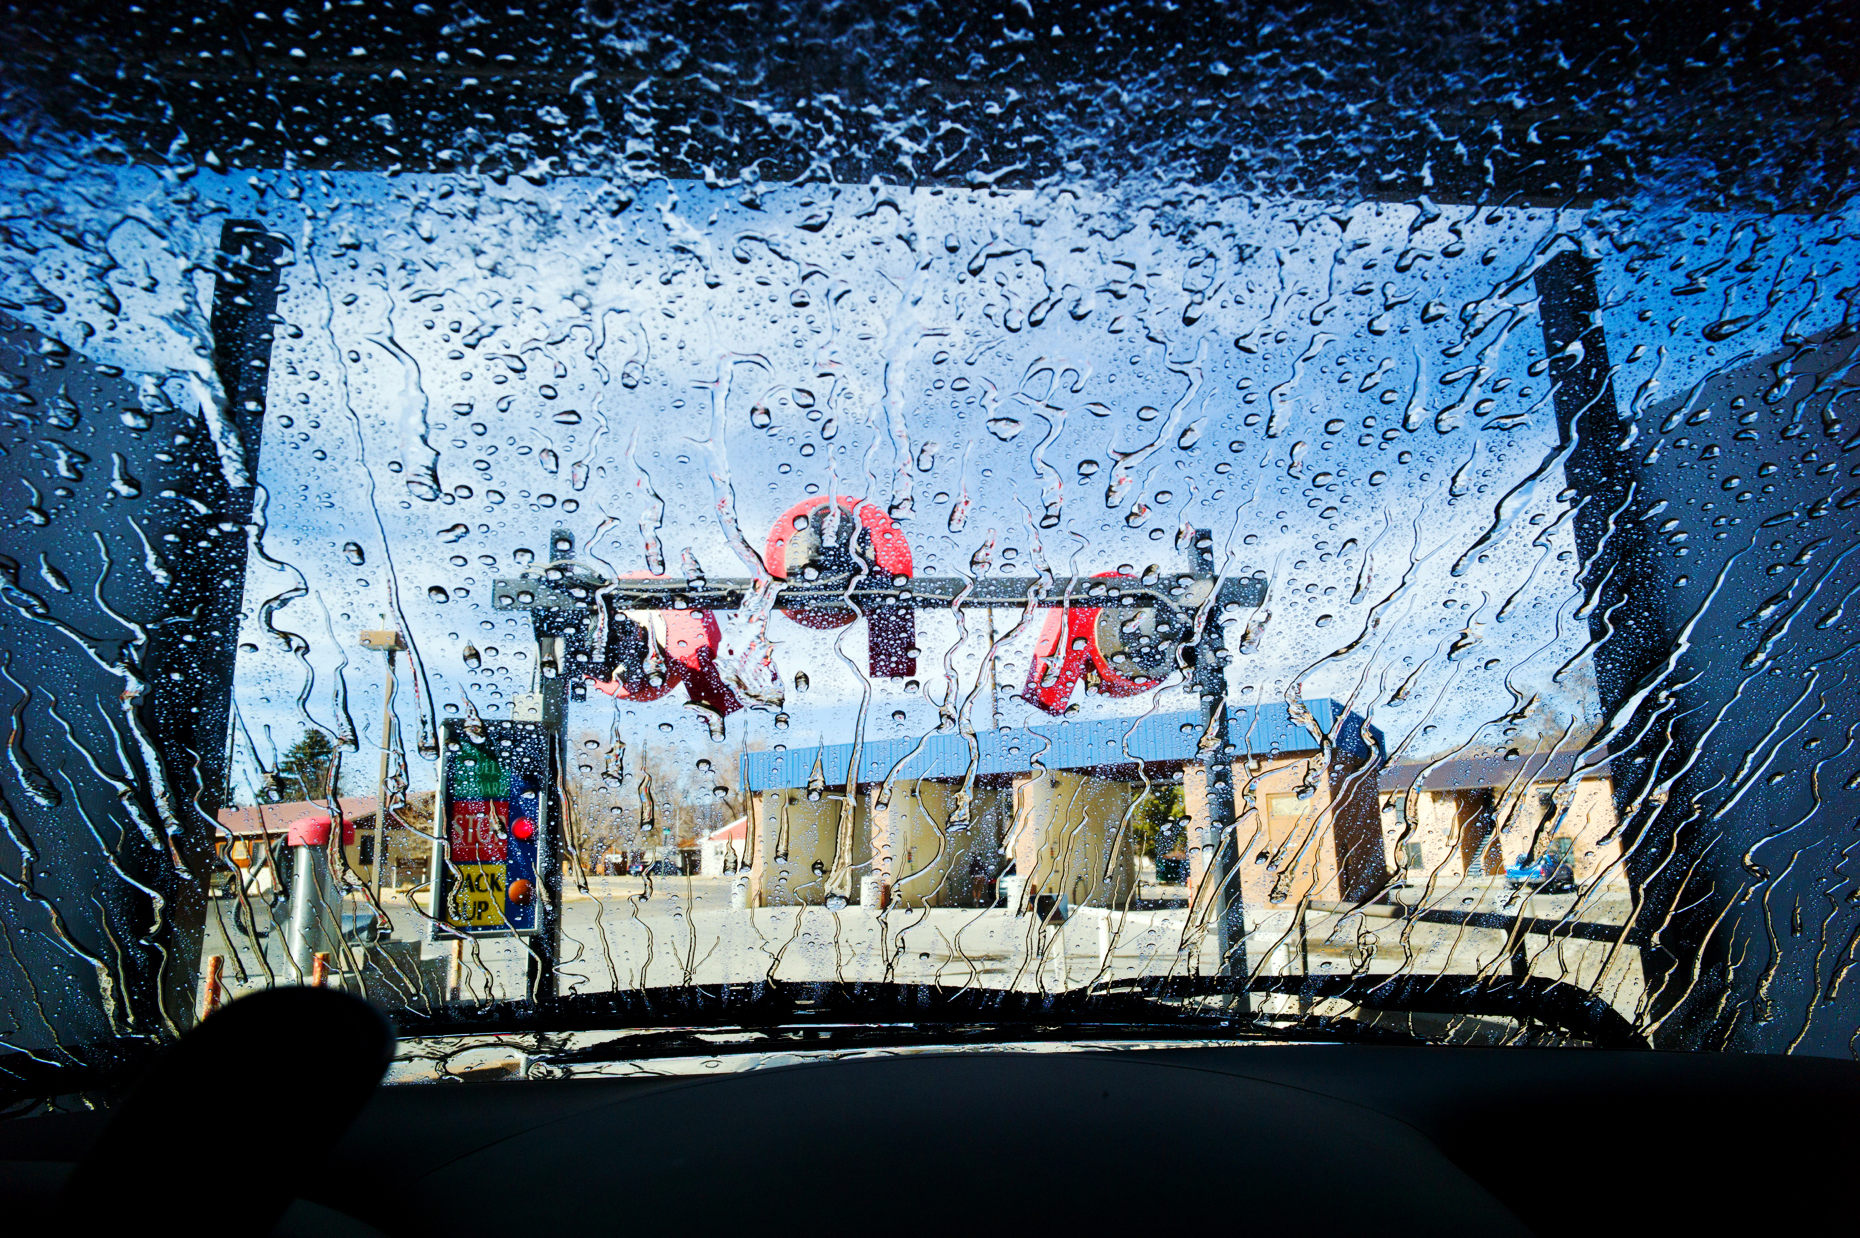 View through the windshield of an automobile in an automated car wash.